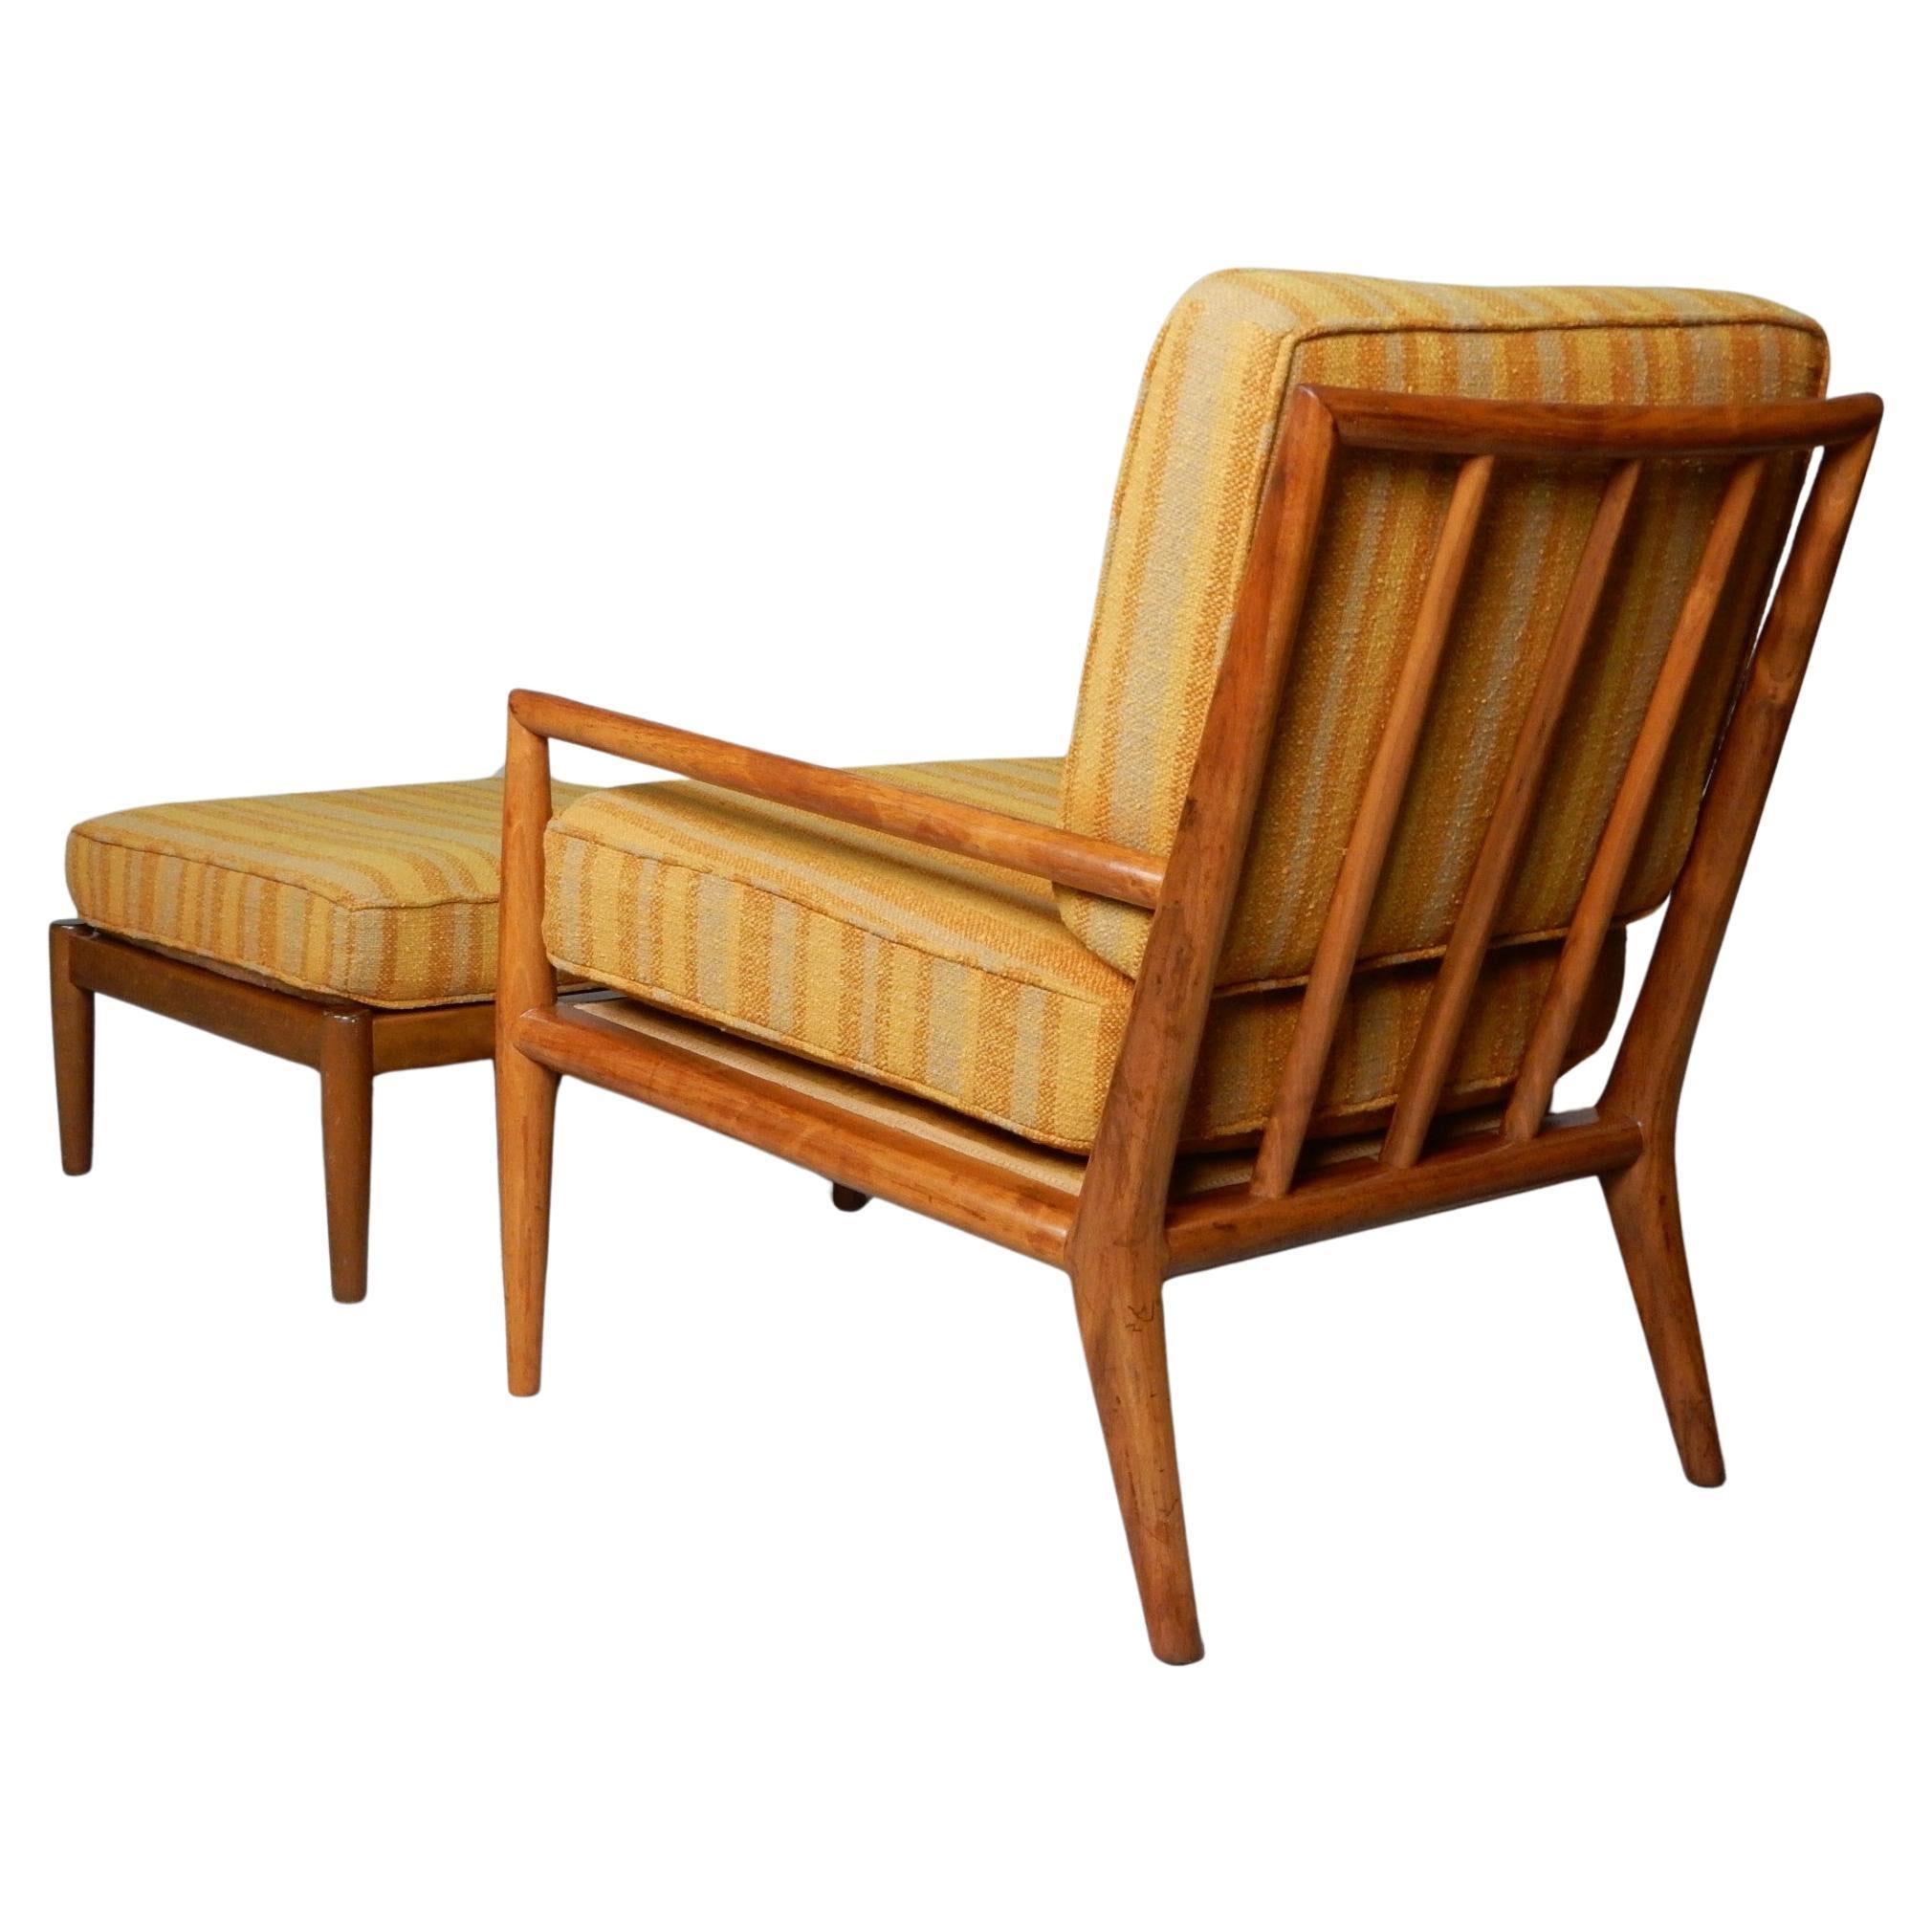 T.H. Robsjohn-Gibbings Lounge Chair & Ottoman by Widdicomb 1950's In Good Condition For Sale In Las Vegas, NV